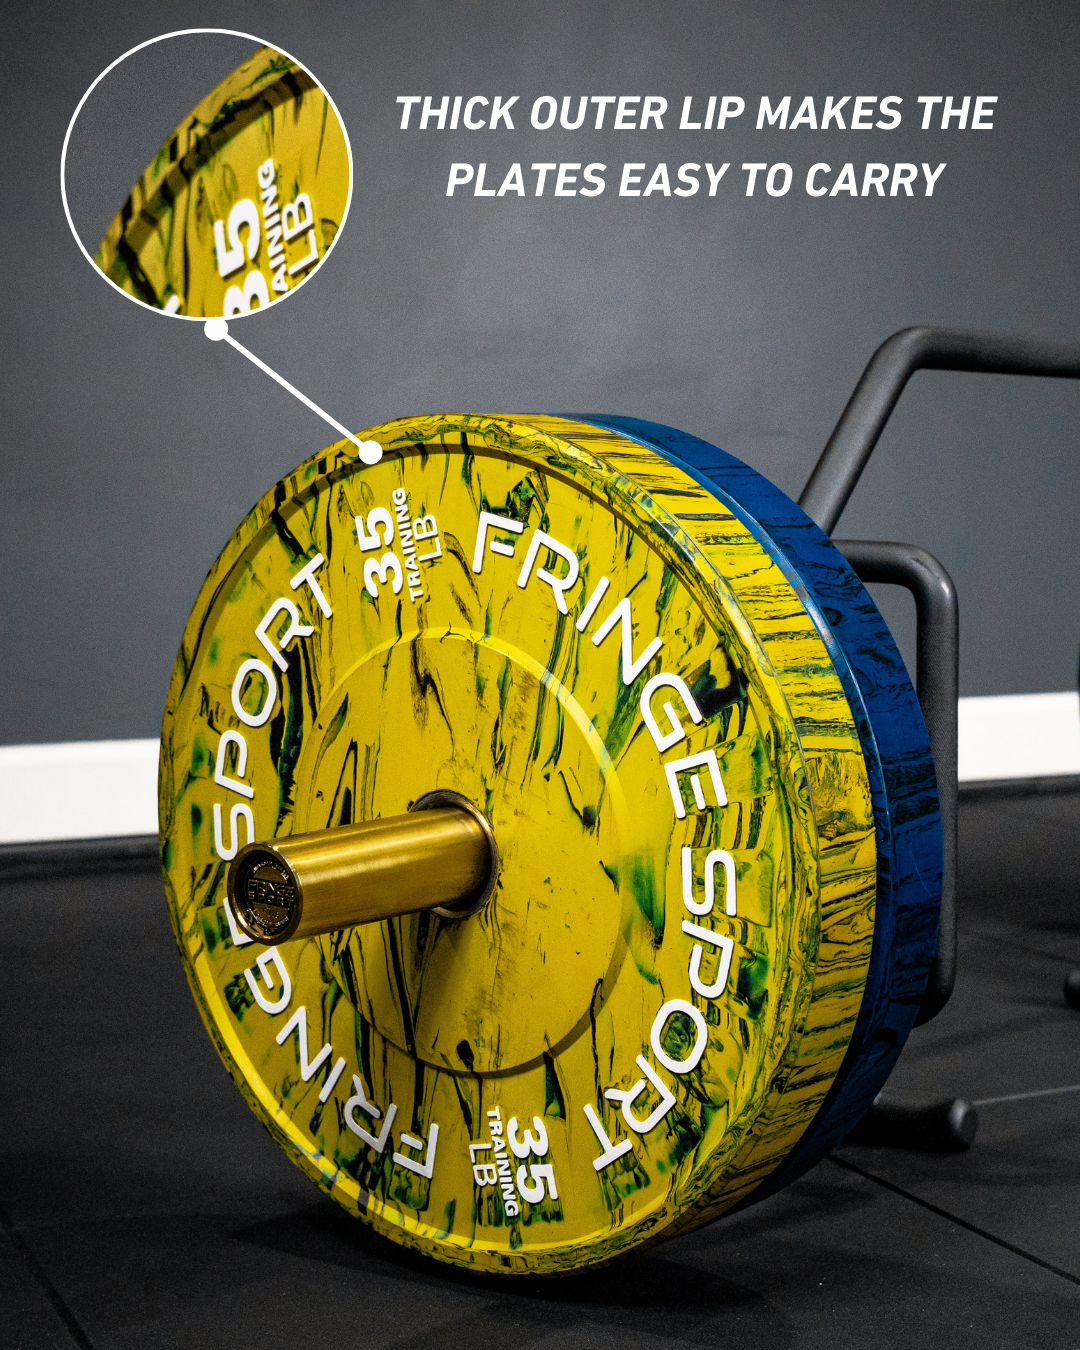 Showing the thick lip of the savage bumper plates which makes it easier to carry.